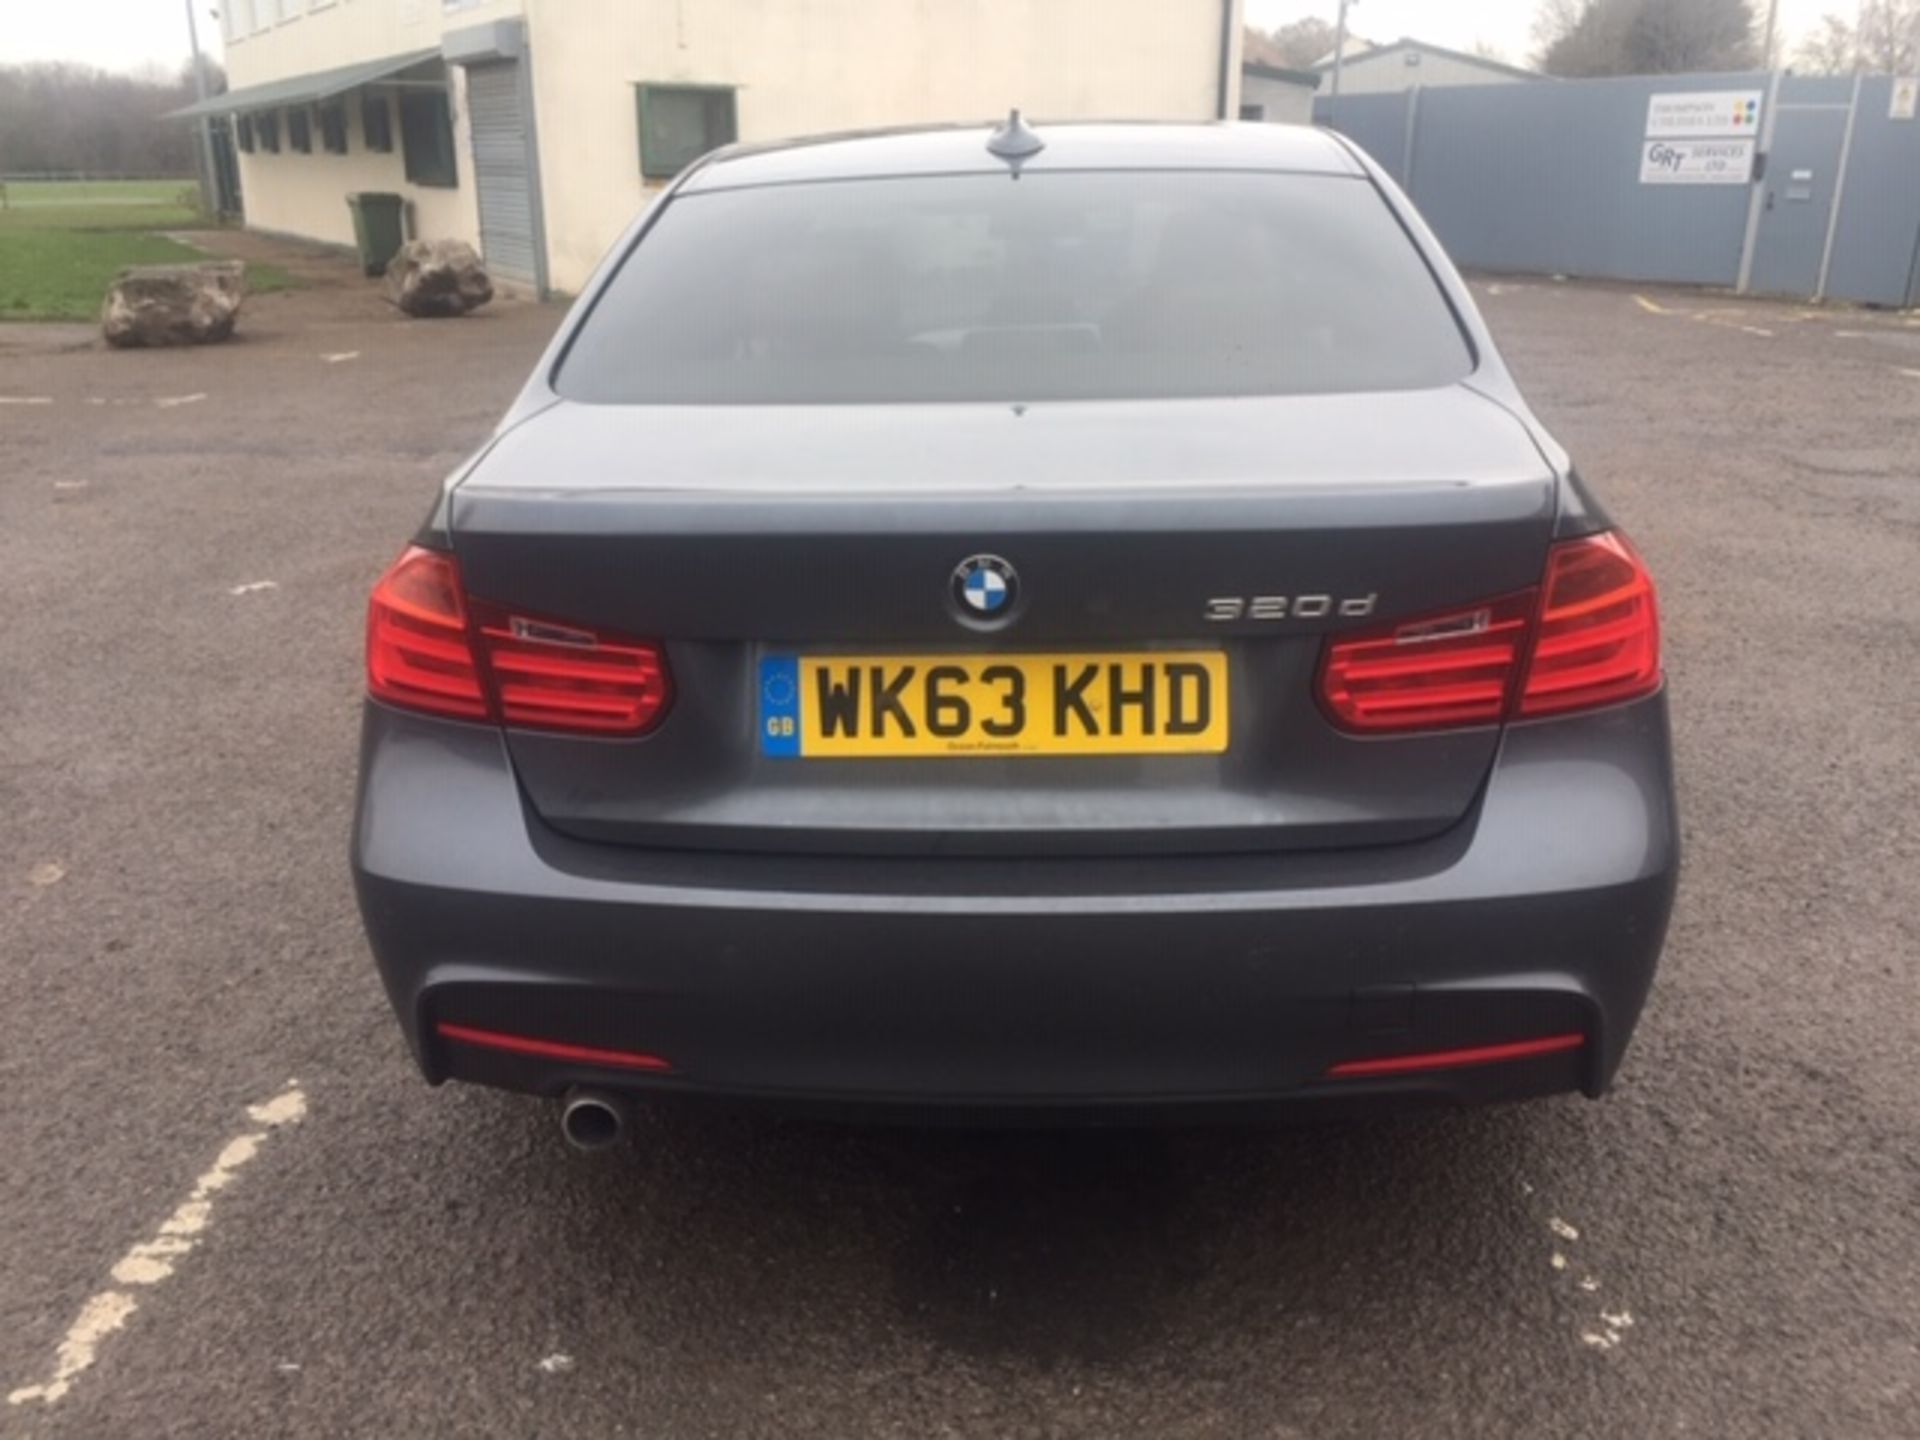 BMW 320D 2.0 M Sport 4 door saloon Registration: WK63 KHD Recorded mileage: 18,046 M.O.T: 28-09-2019 - Image 4 of 14